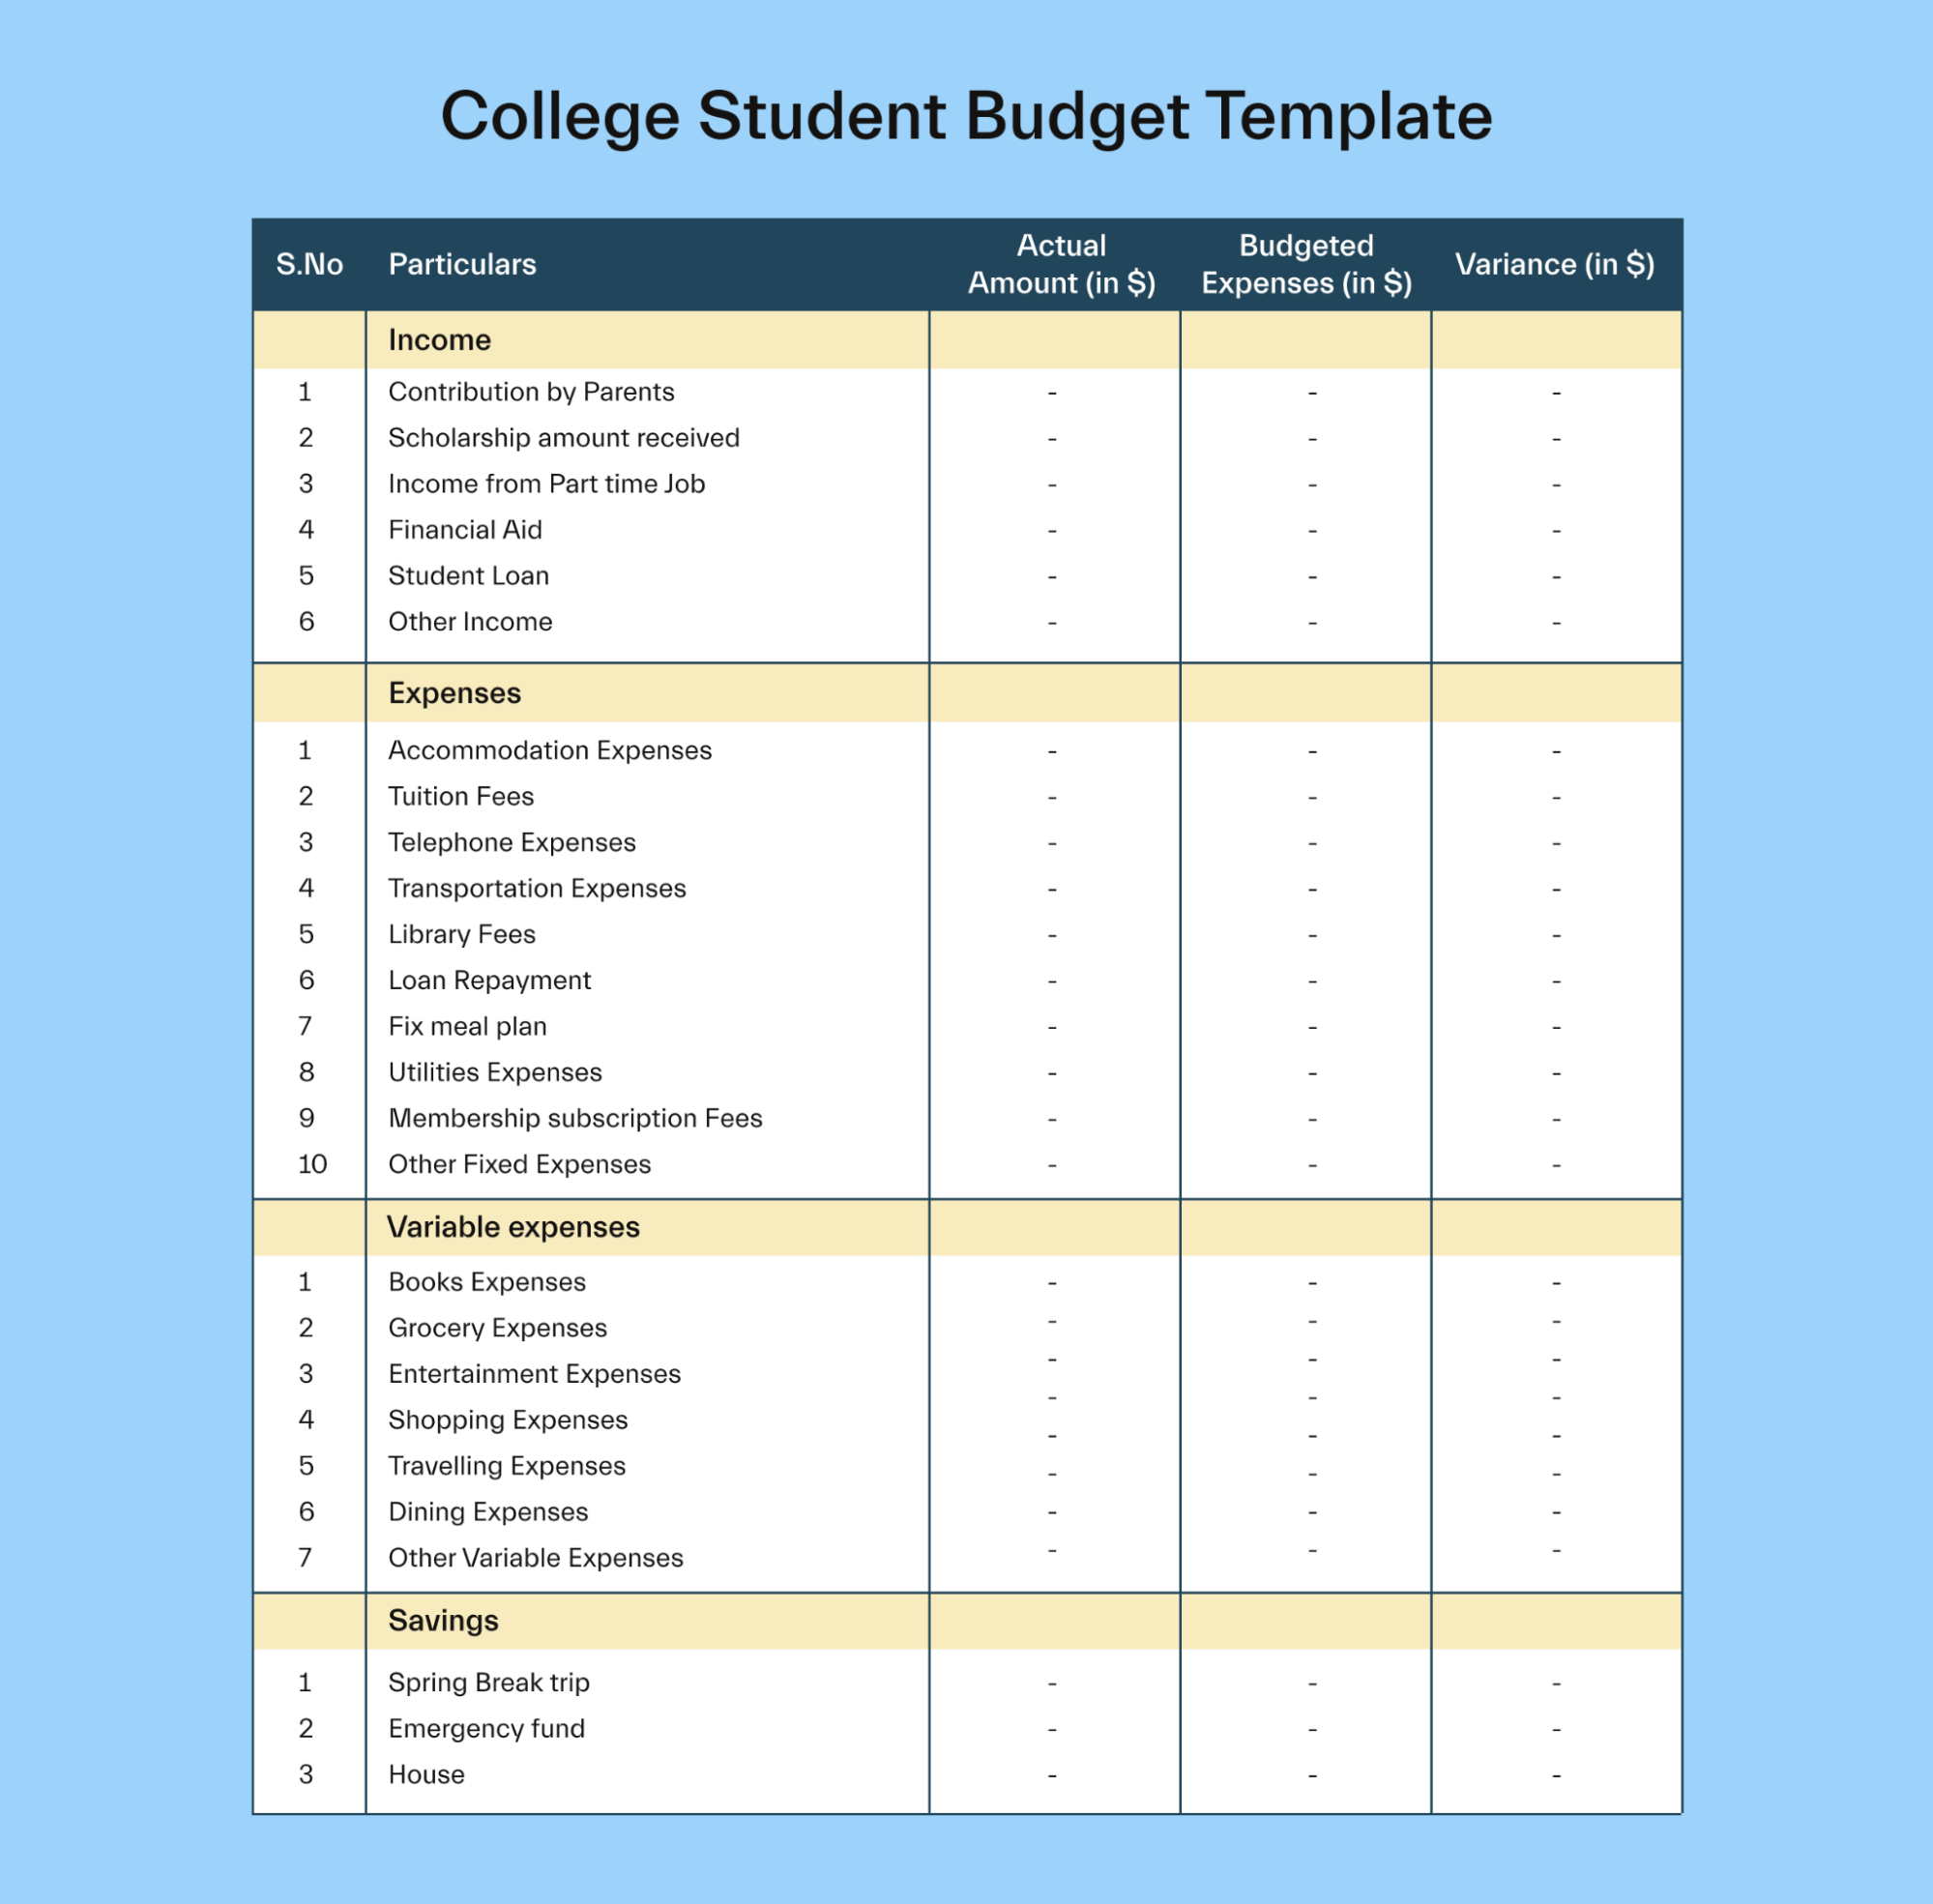 Traditional budget template